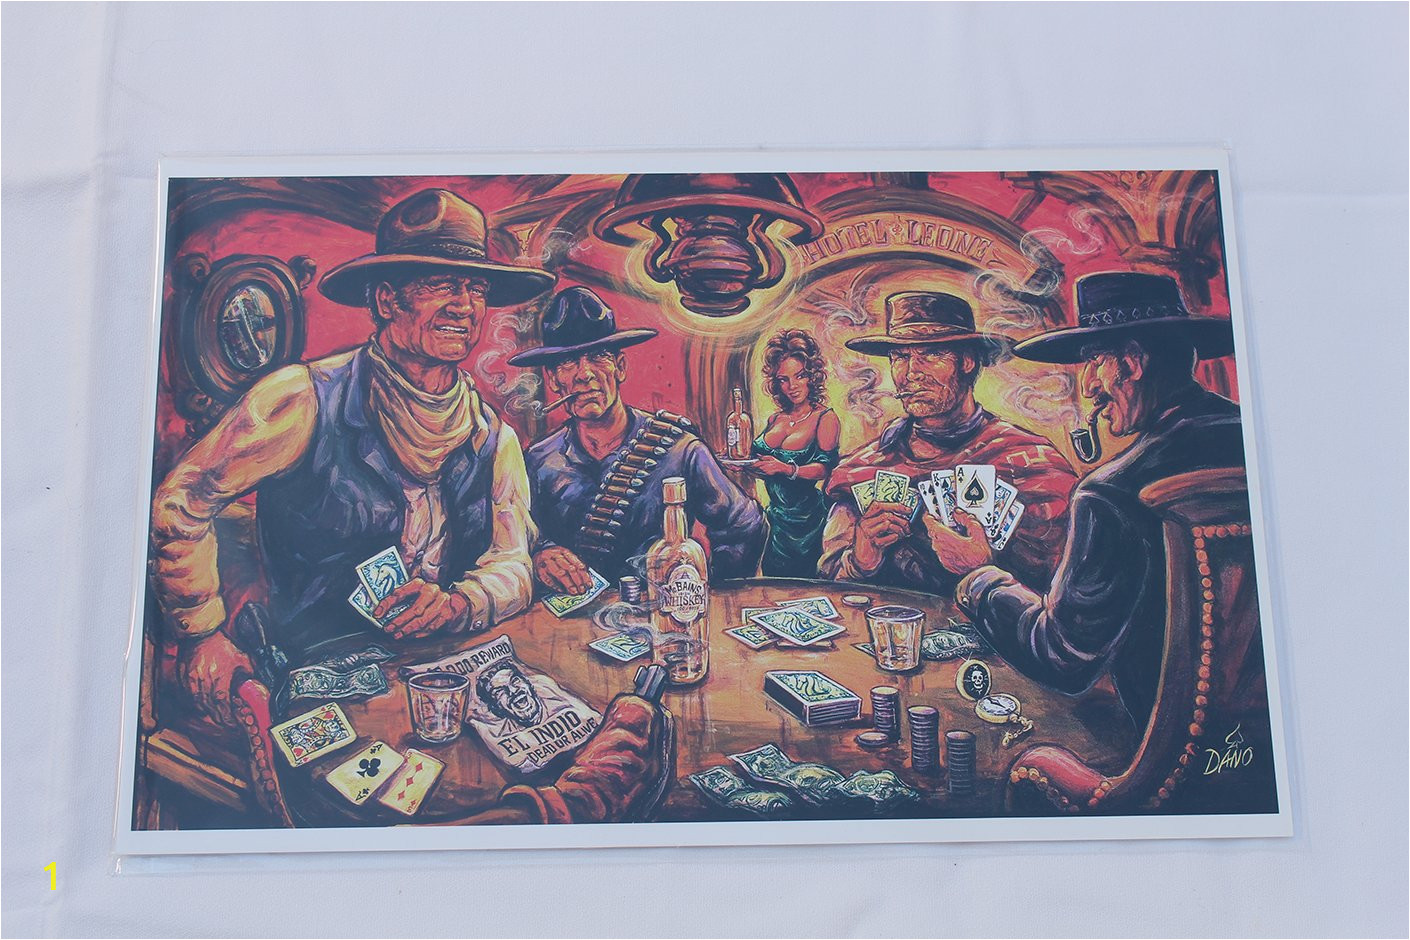 John Wayne Wall Mural Hotel Leone Print From Art by Dano Featuring John Wayne Lee Marvin and the Man with No Name Playing